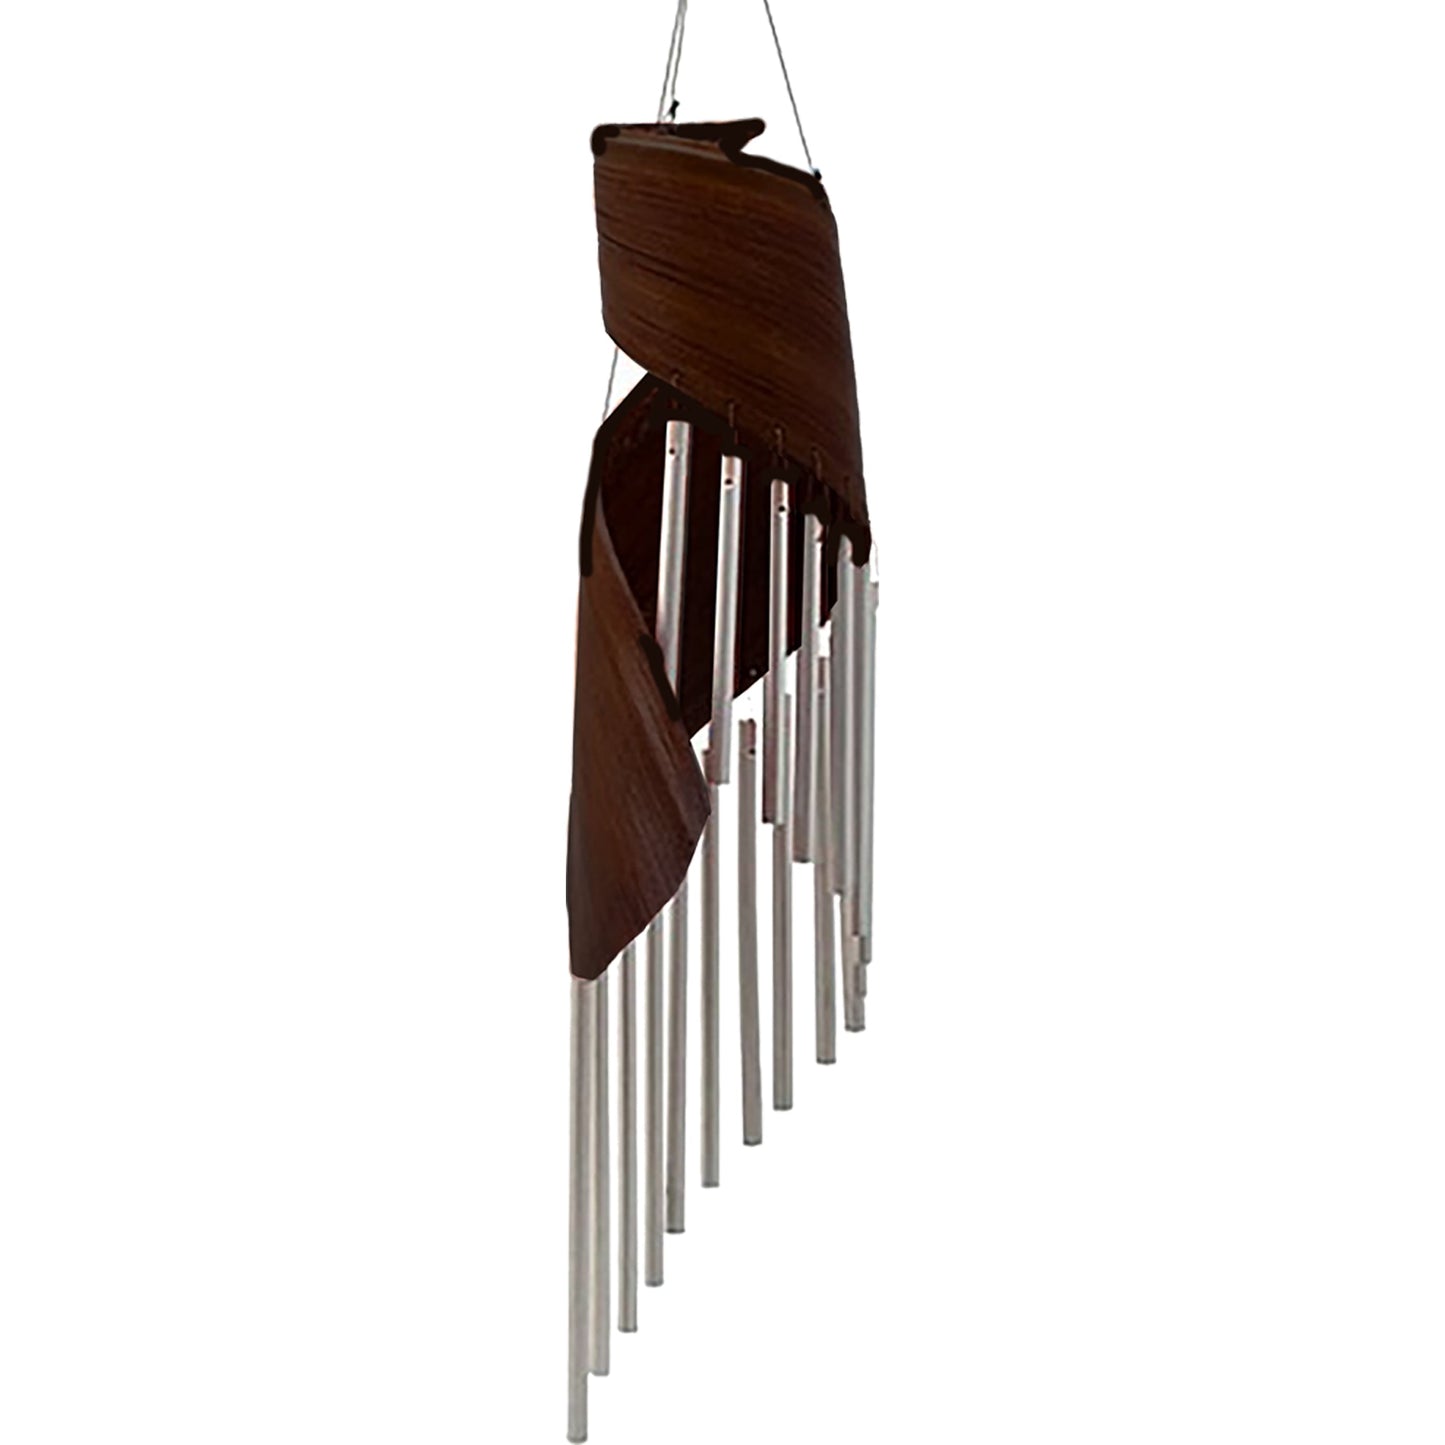 Coconut Leaf Wind Chimes - Chocolate  from Eleanoras